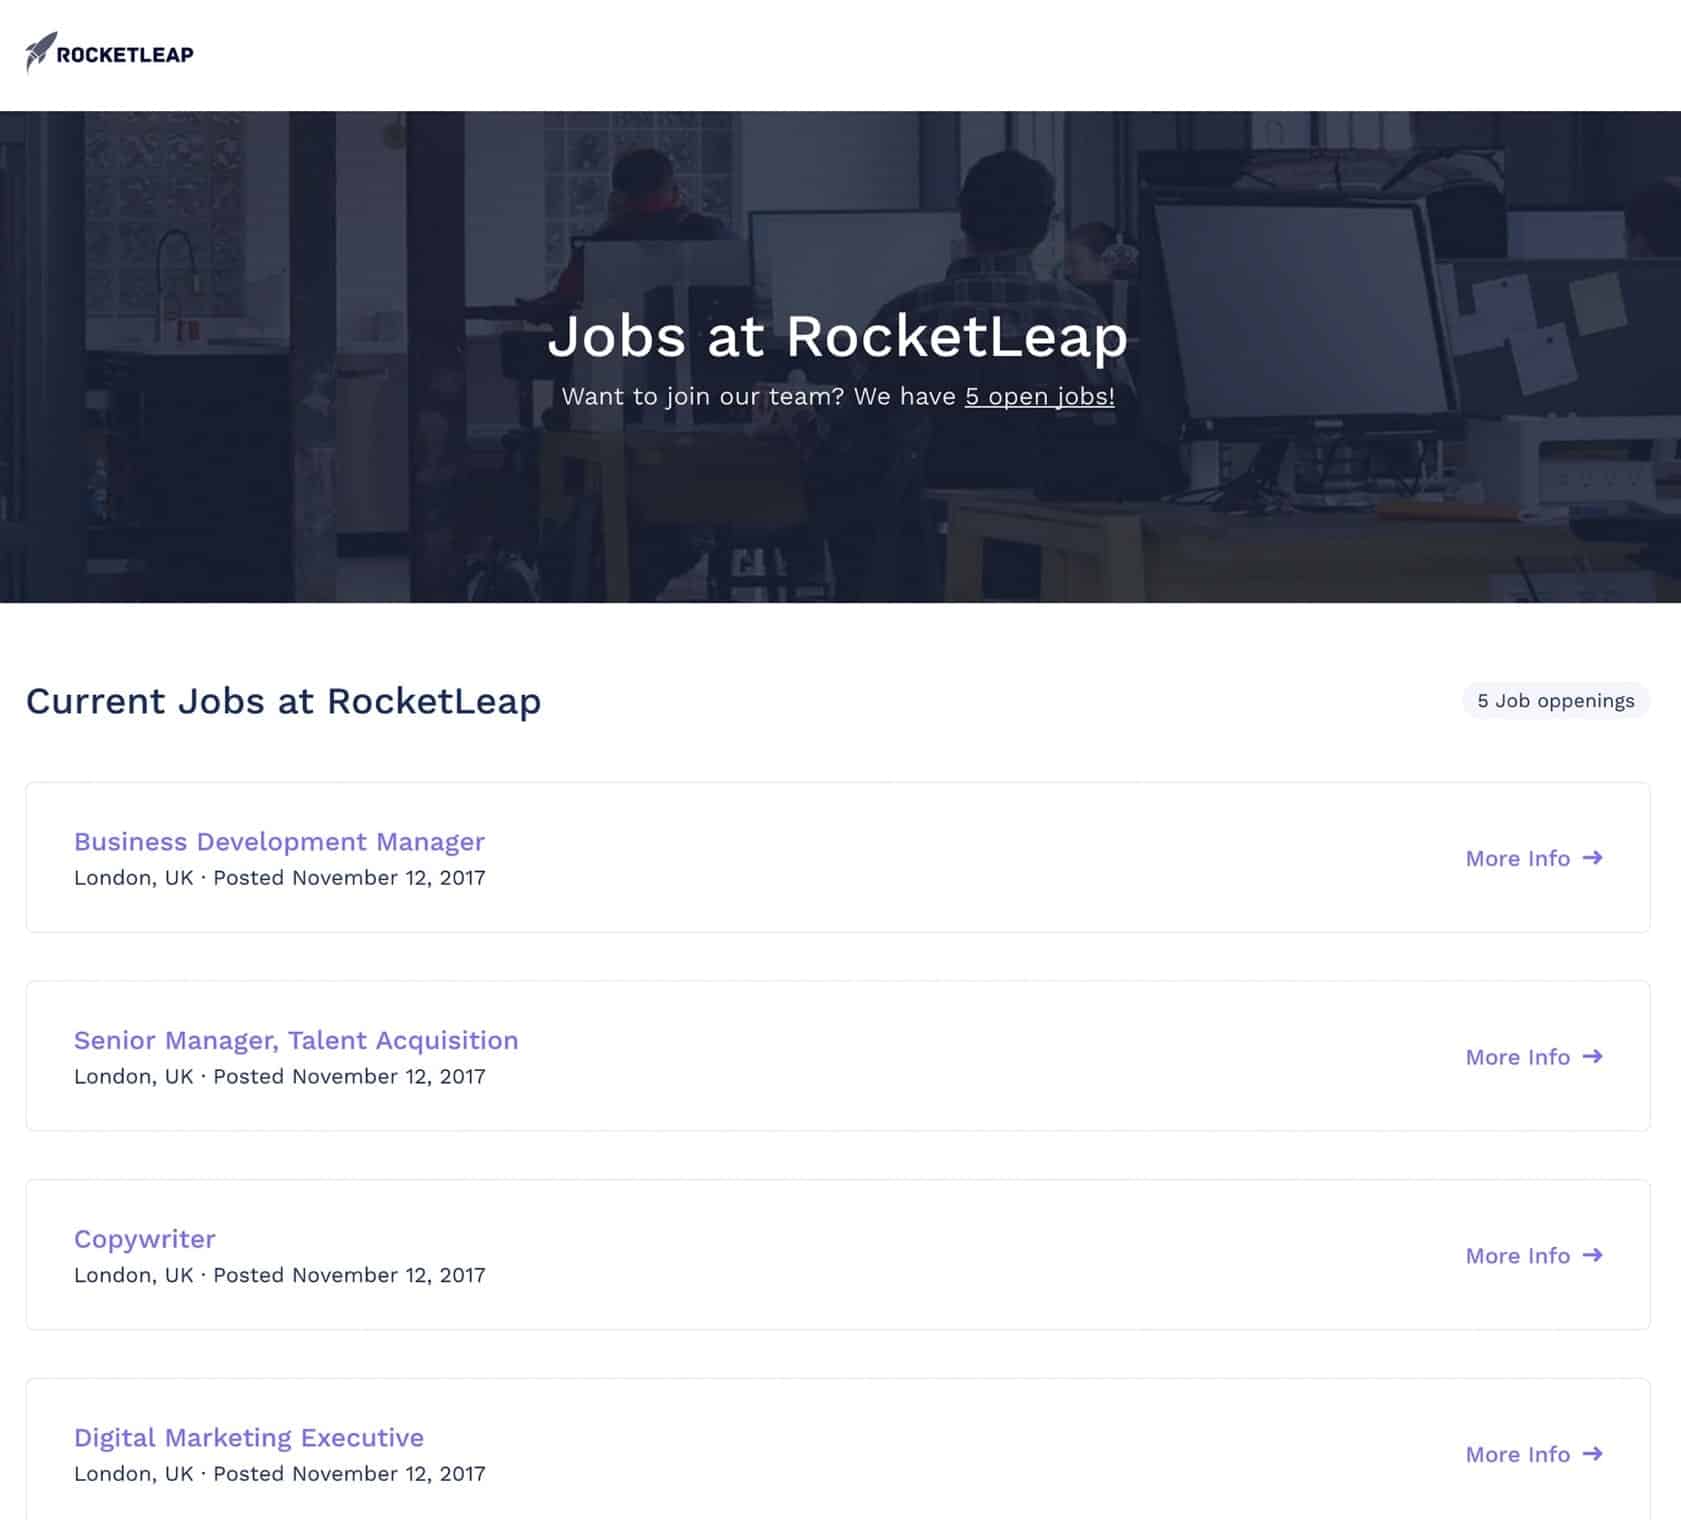 Convert more top candidates with beautiful career pages